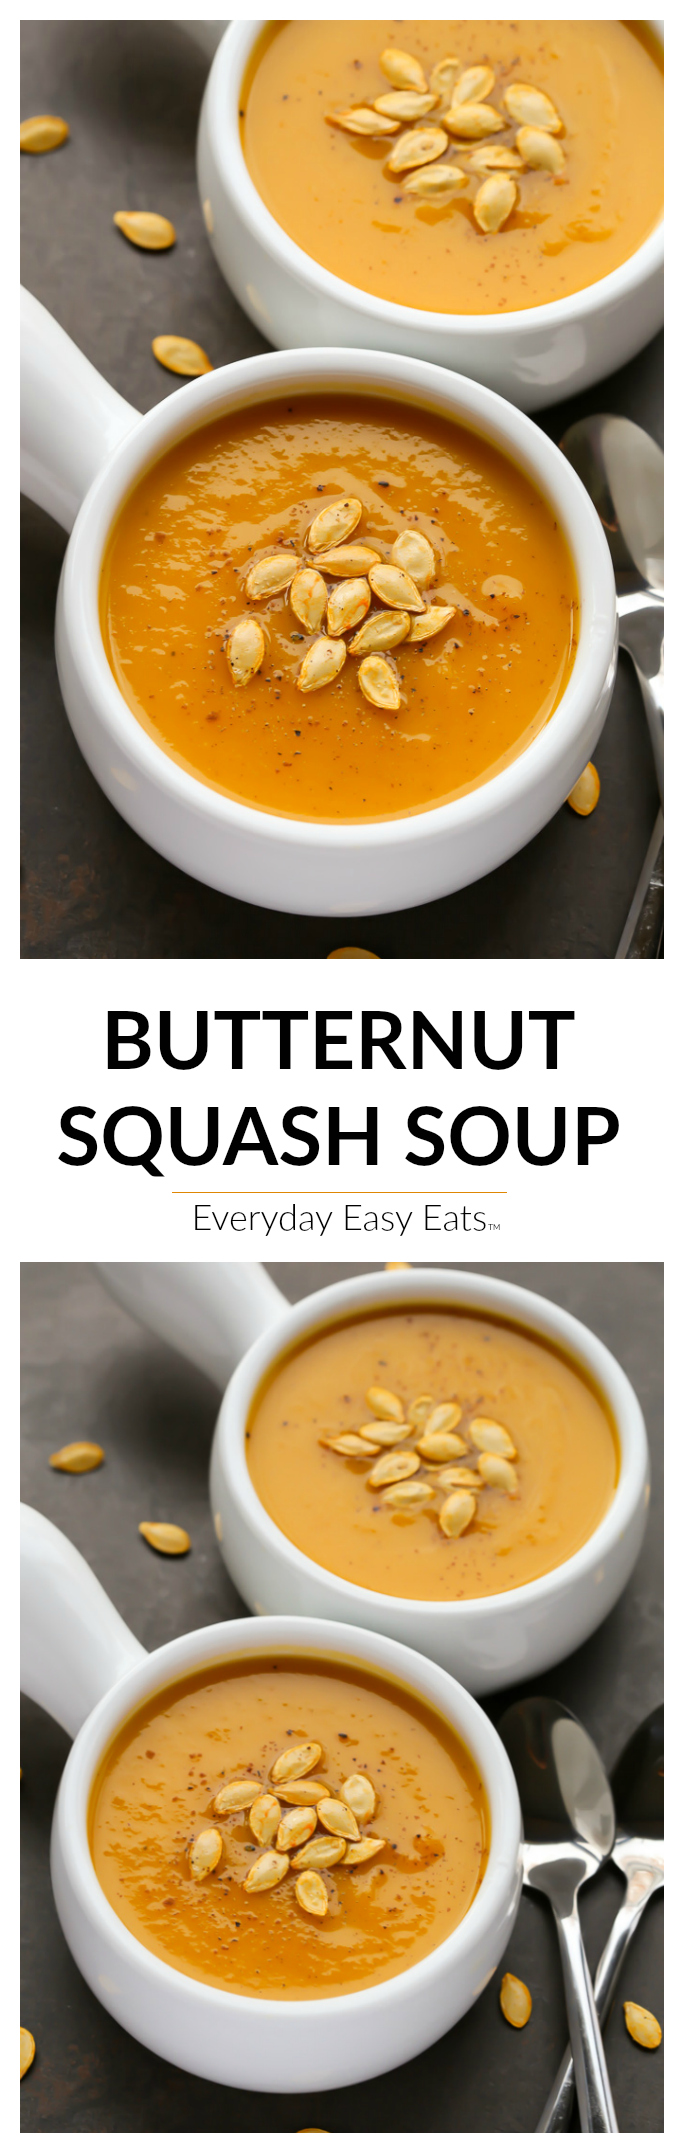 Butternut Squash Apple Soup - This easy & healthy soup recipe is vegan, gluten-free, dairy-free and paleo. It is the BEST Fall & Thanksgiving soup recipe!